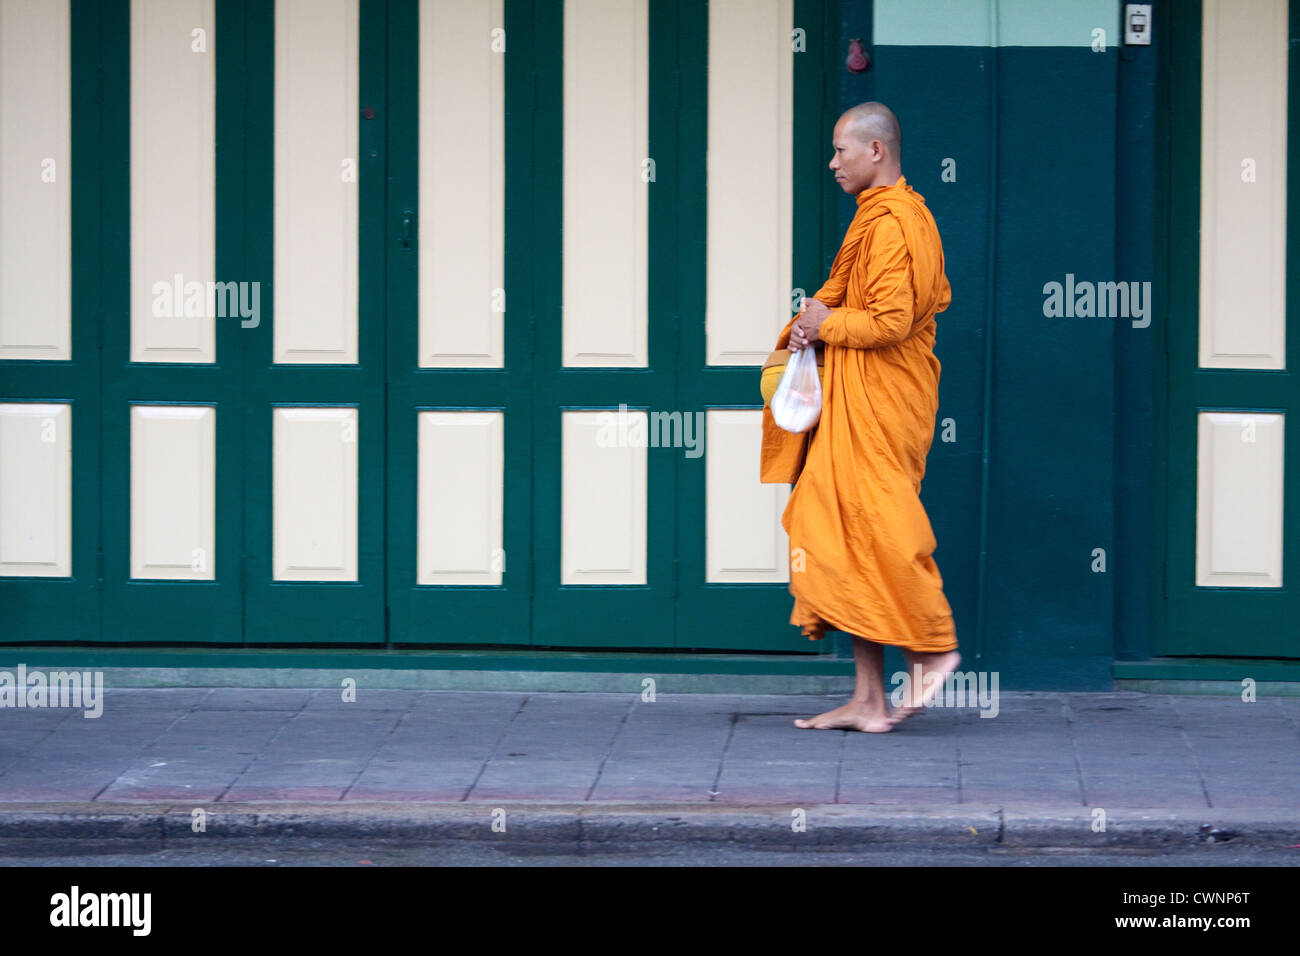 Thai Buddhist monk walking the streets of Bangkok in the early morning wearing traditional orange Buddhist robes and begging for alms. Stock Photo